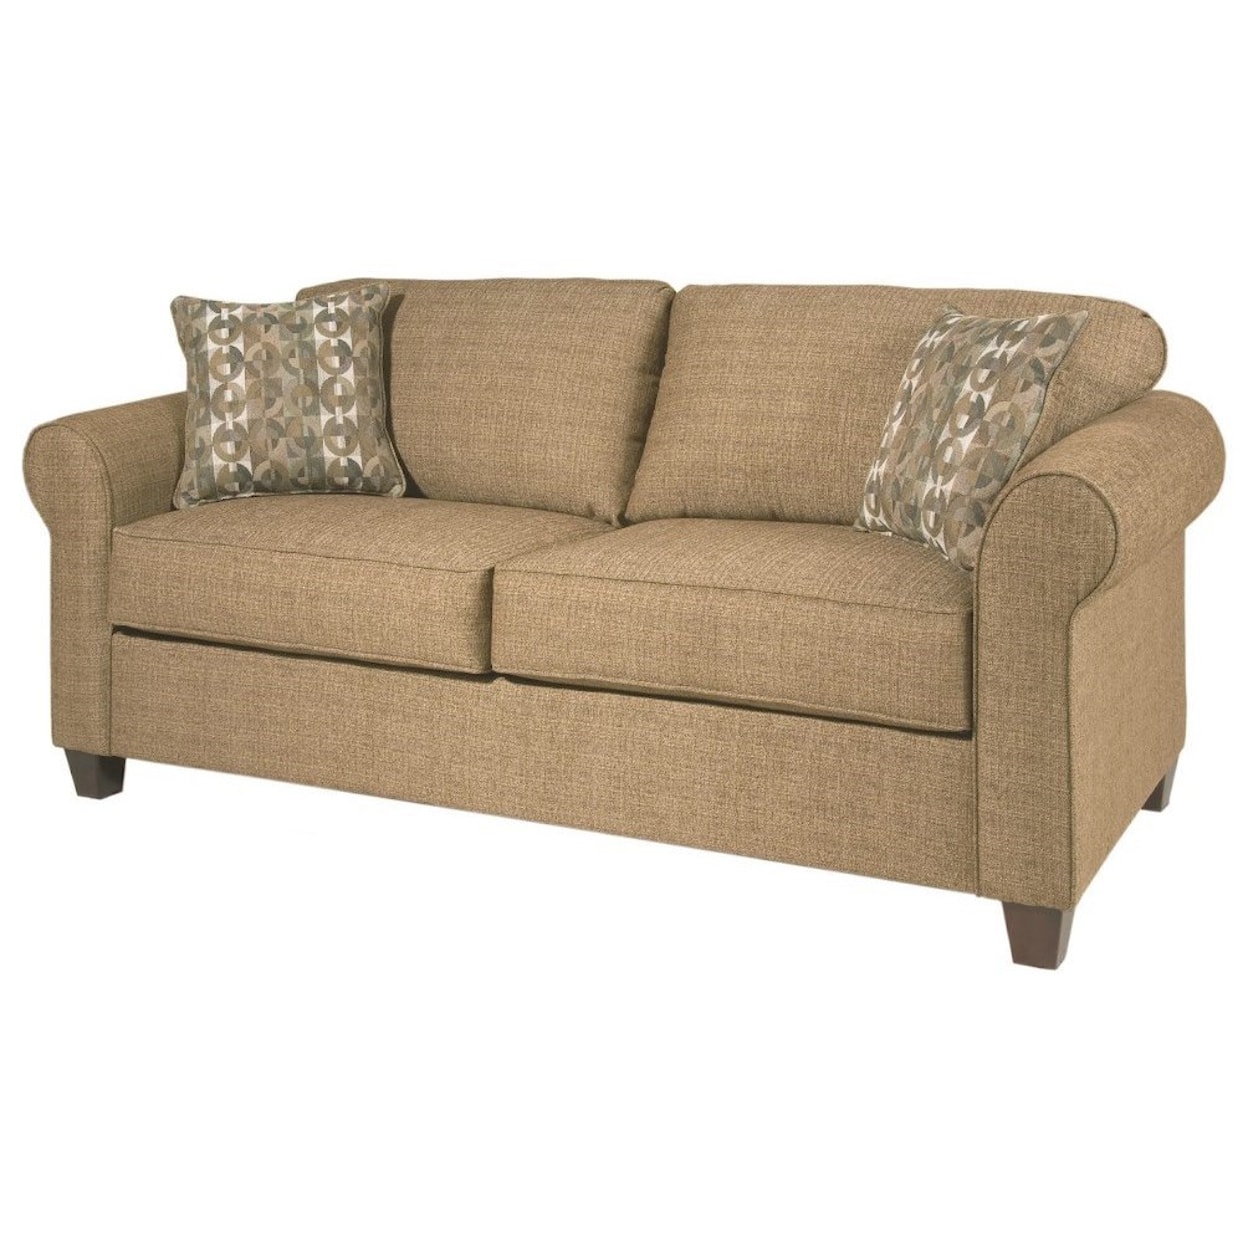 Serta Upholstery by Hughes Furniture 1750 Queen Sleeper